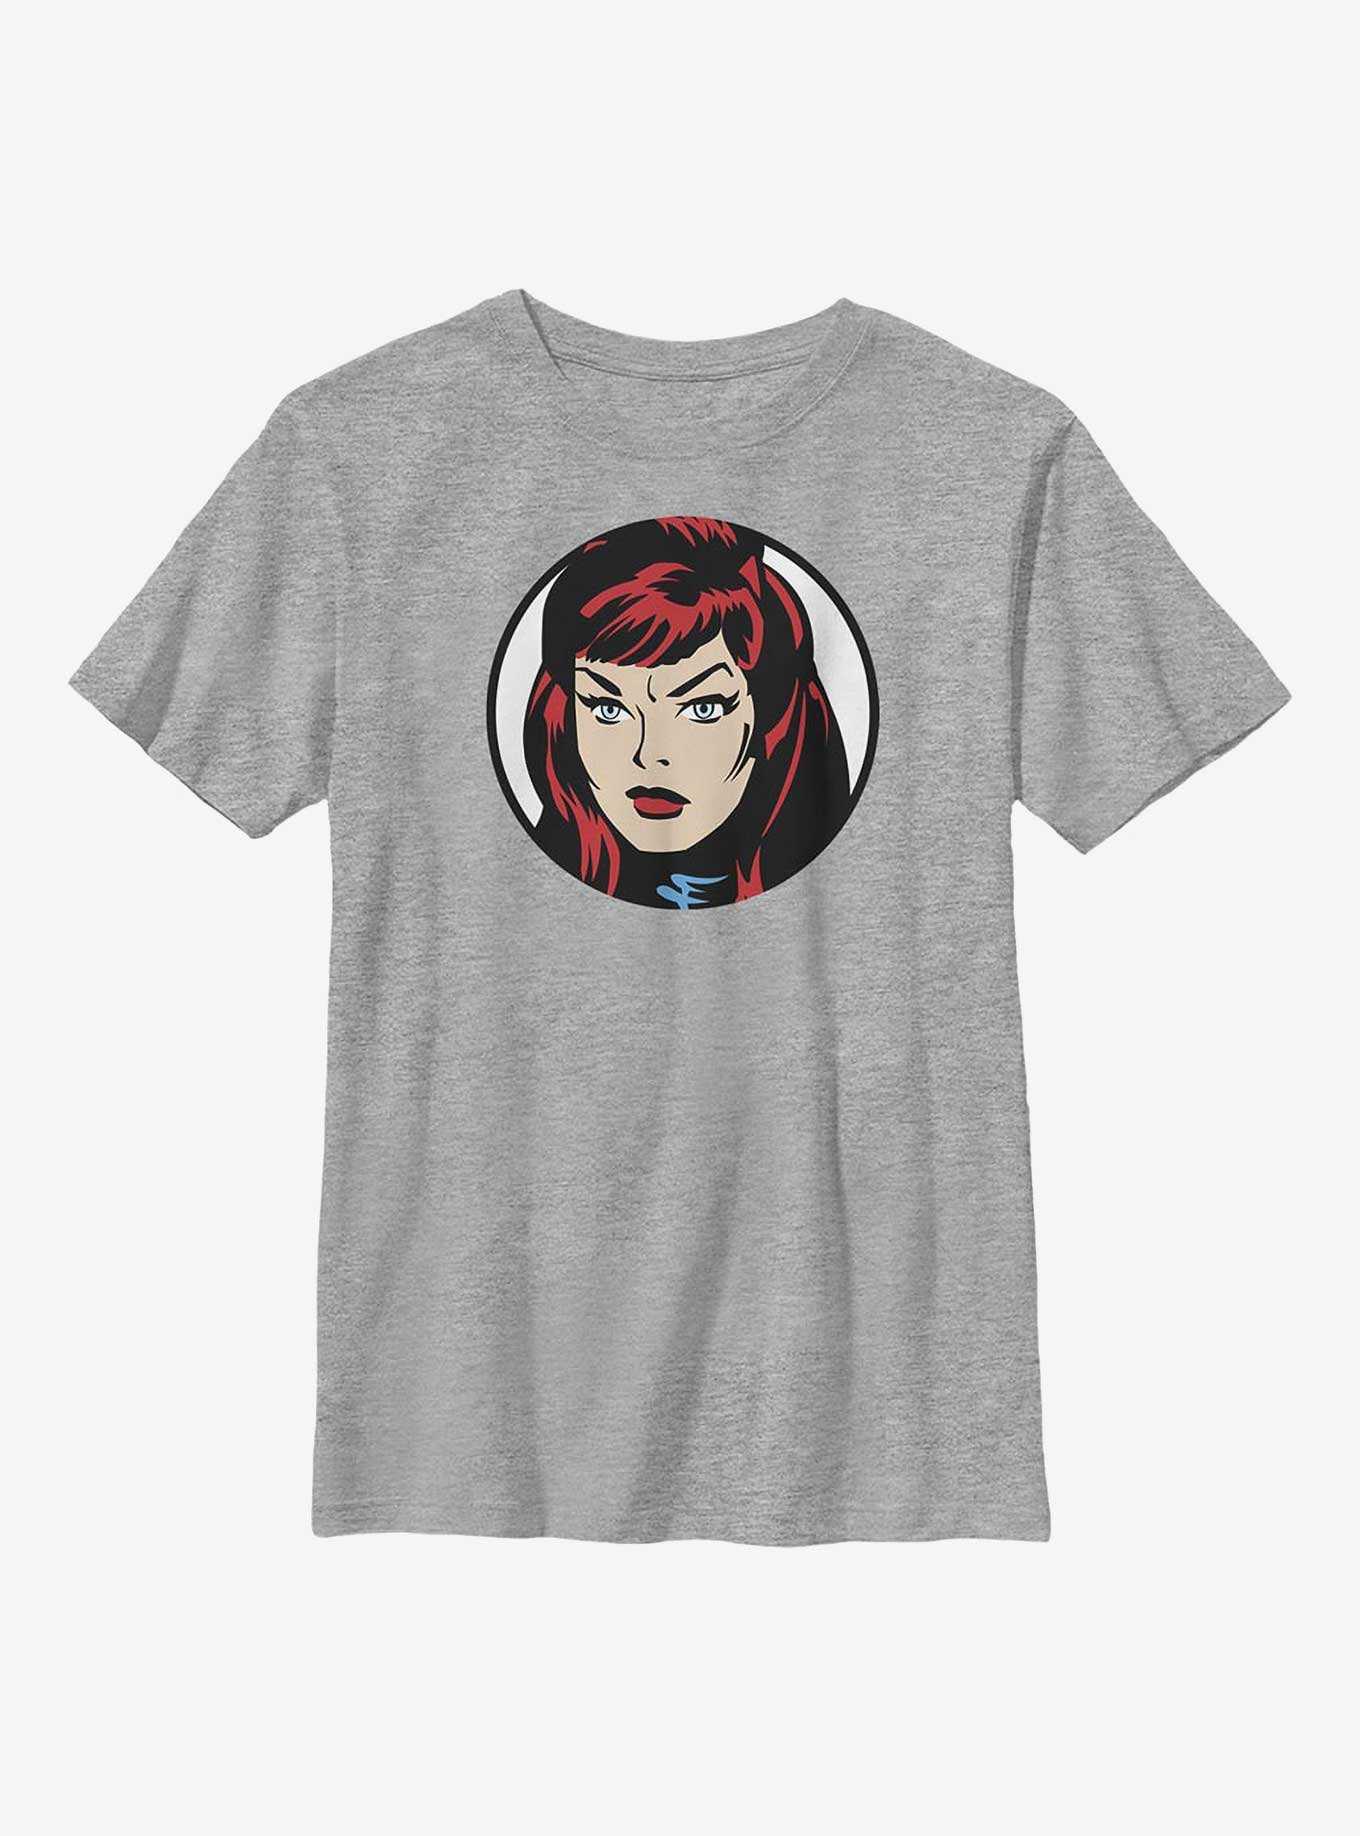 Marvel Black Widow Face Youth T-Shirt, , hi-res